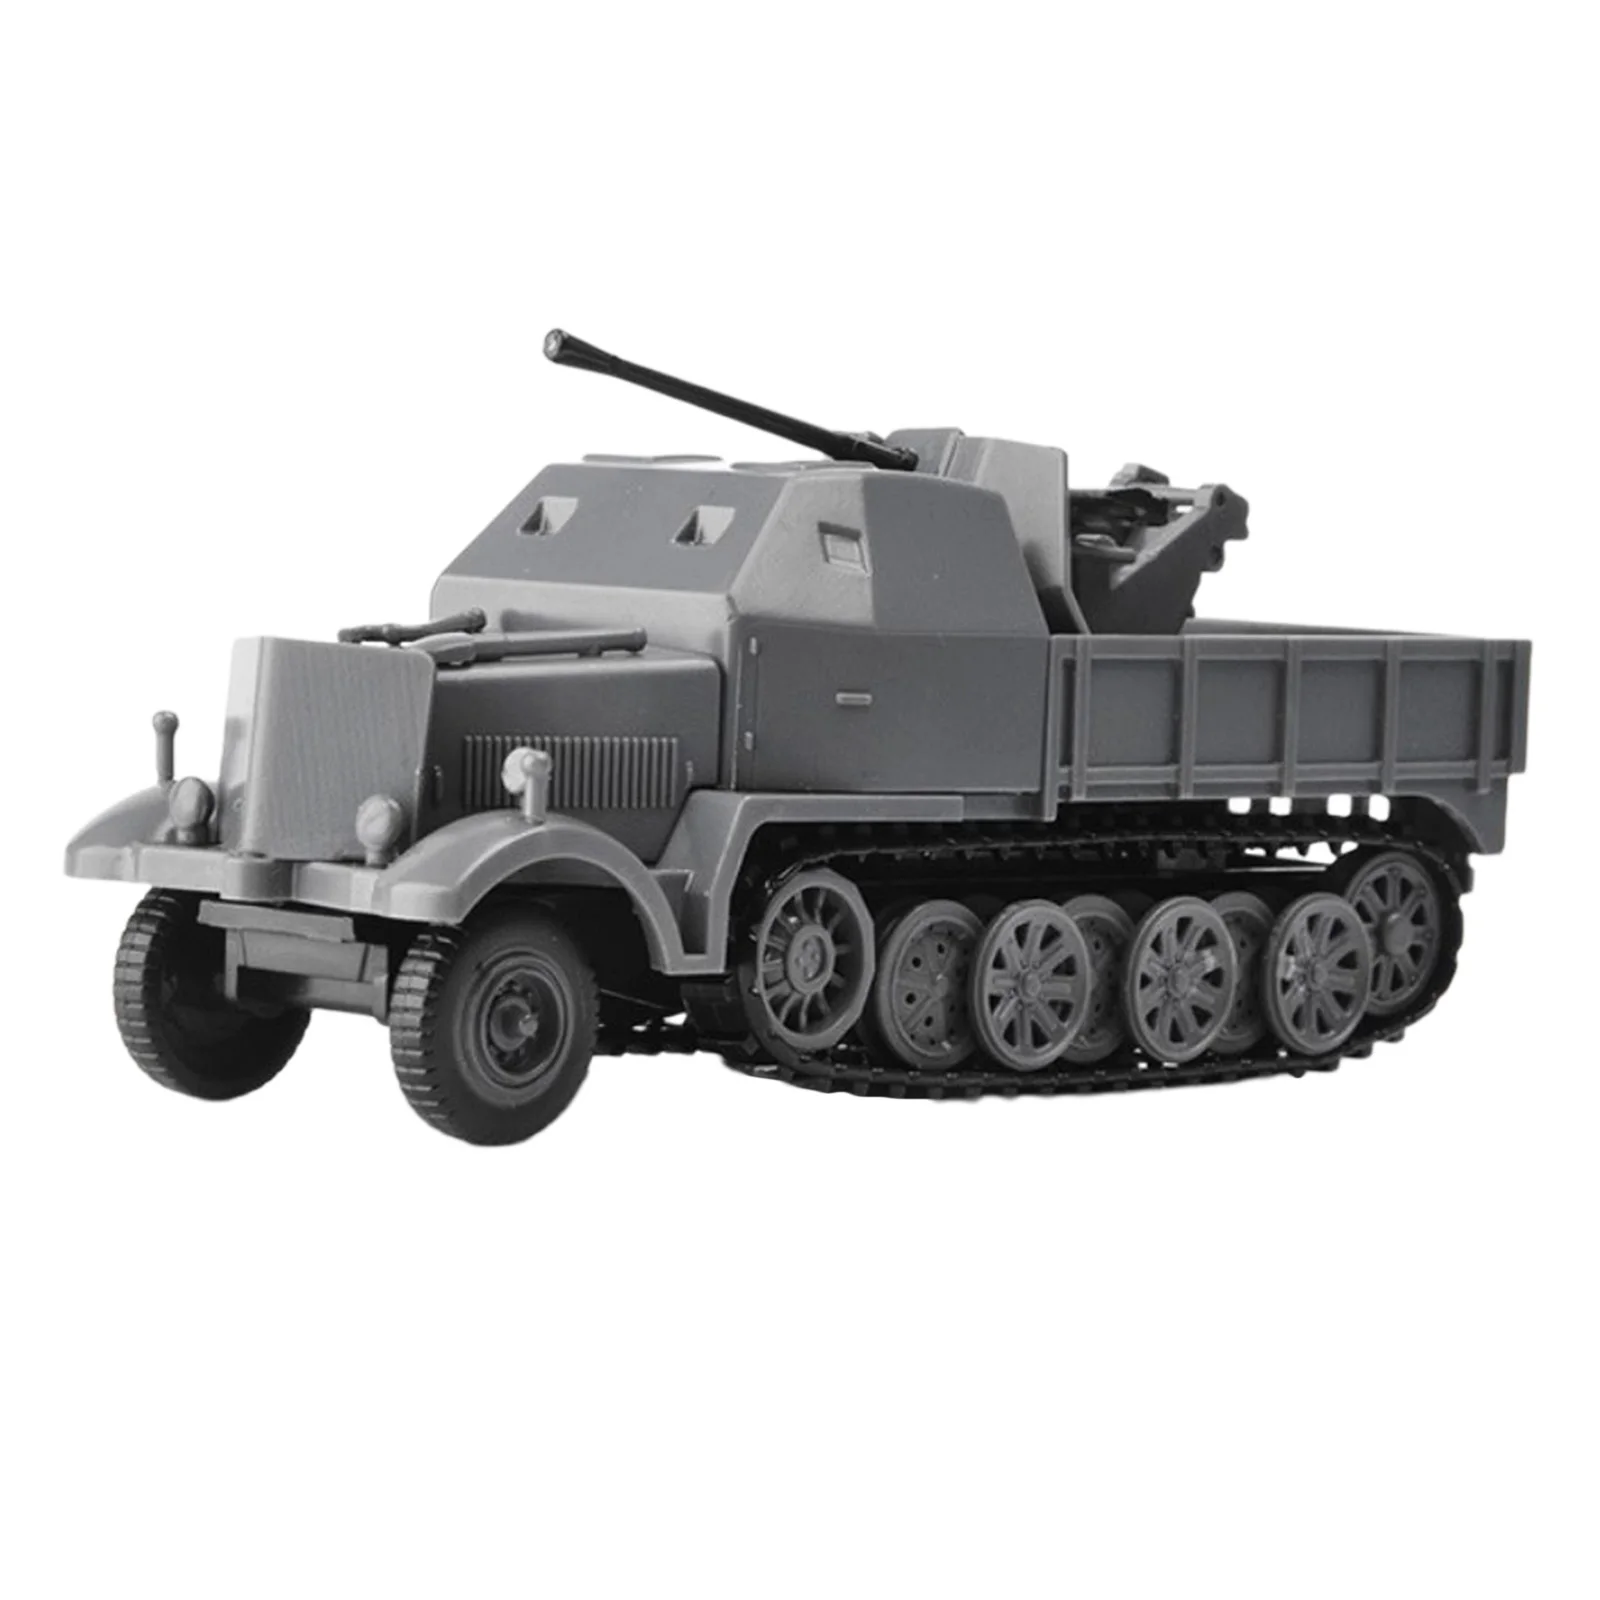 1/72 Half Track Armored Vehicle Toys Assembled Vehicle Static Plastic Model